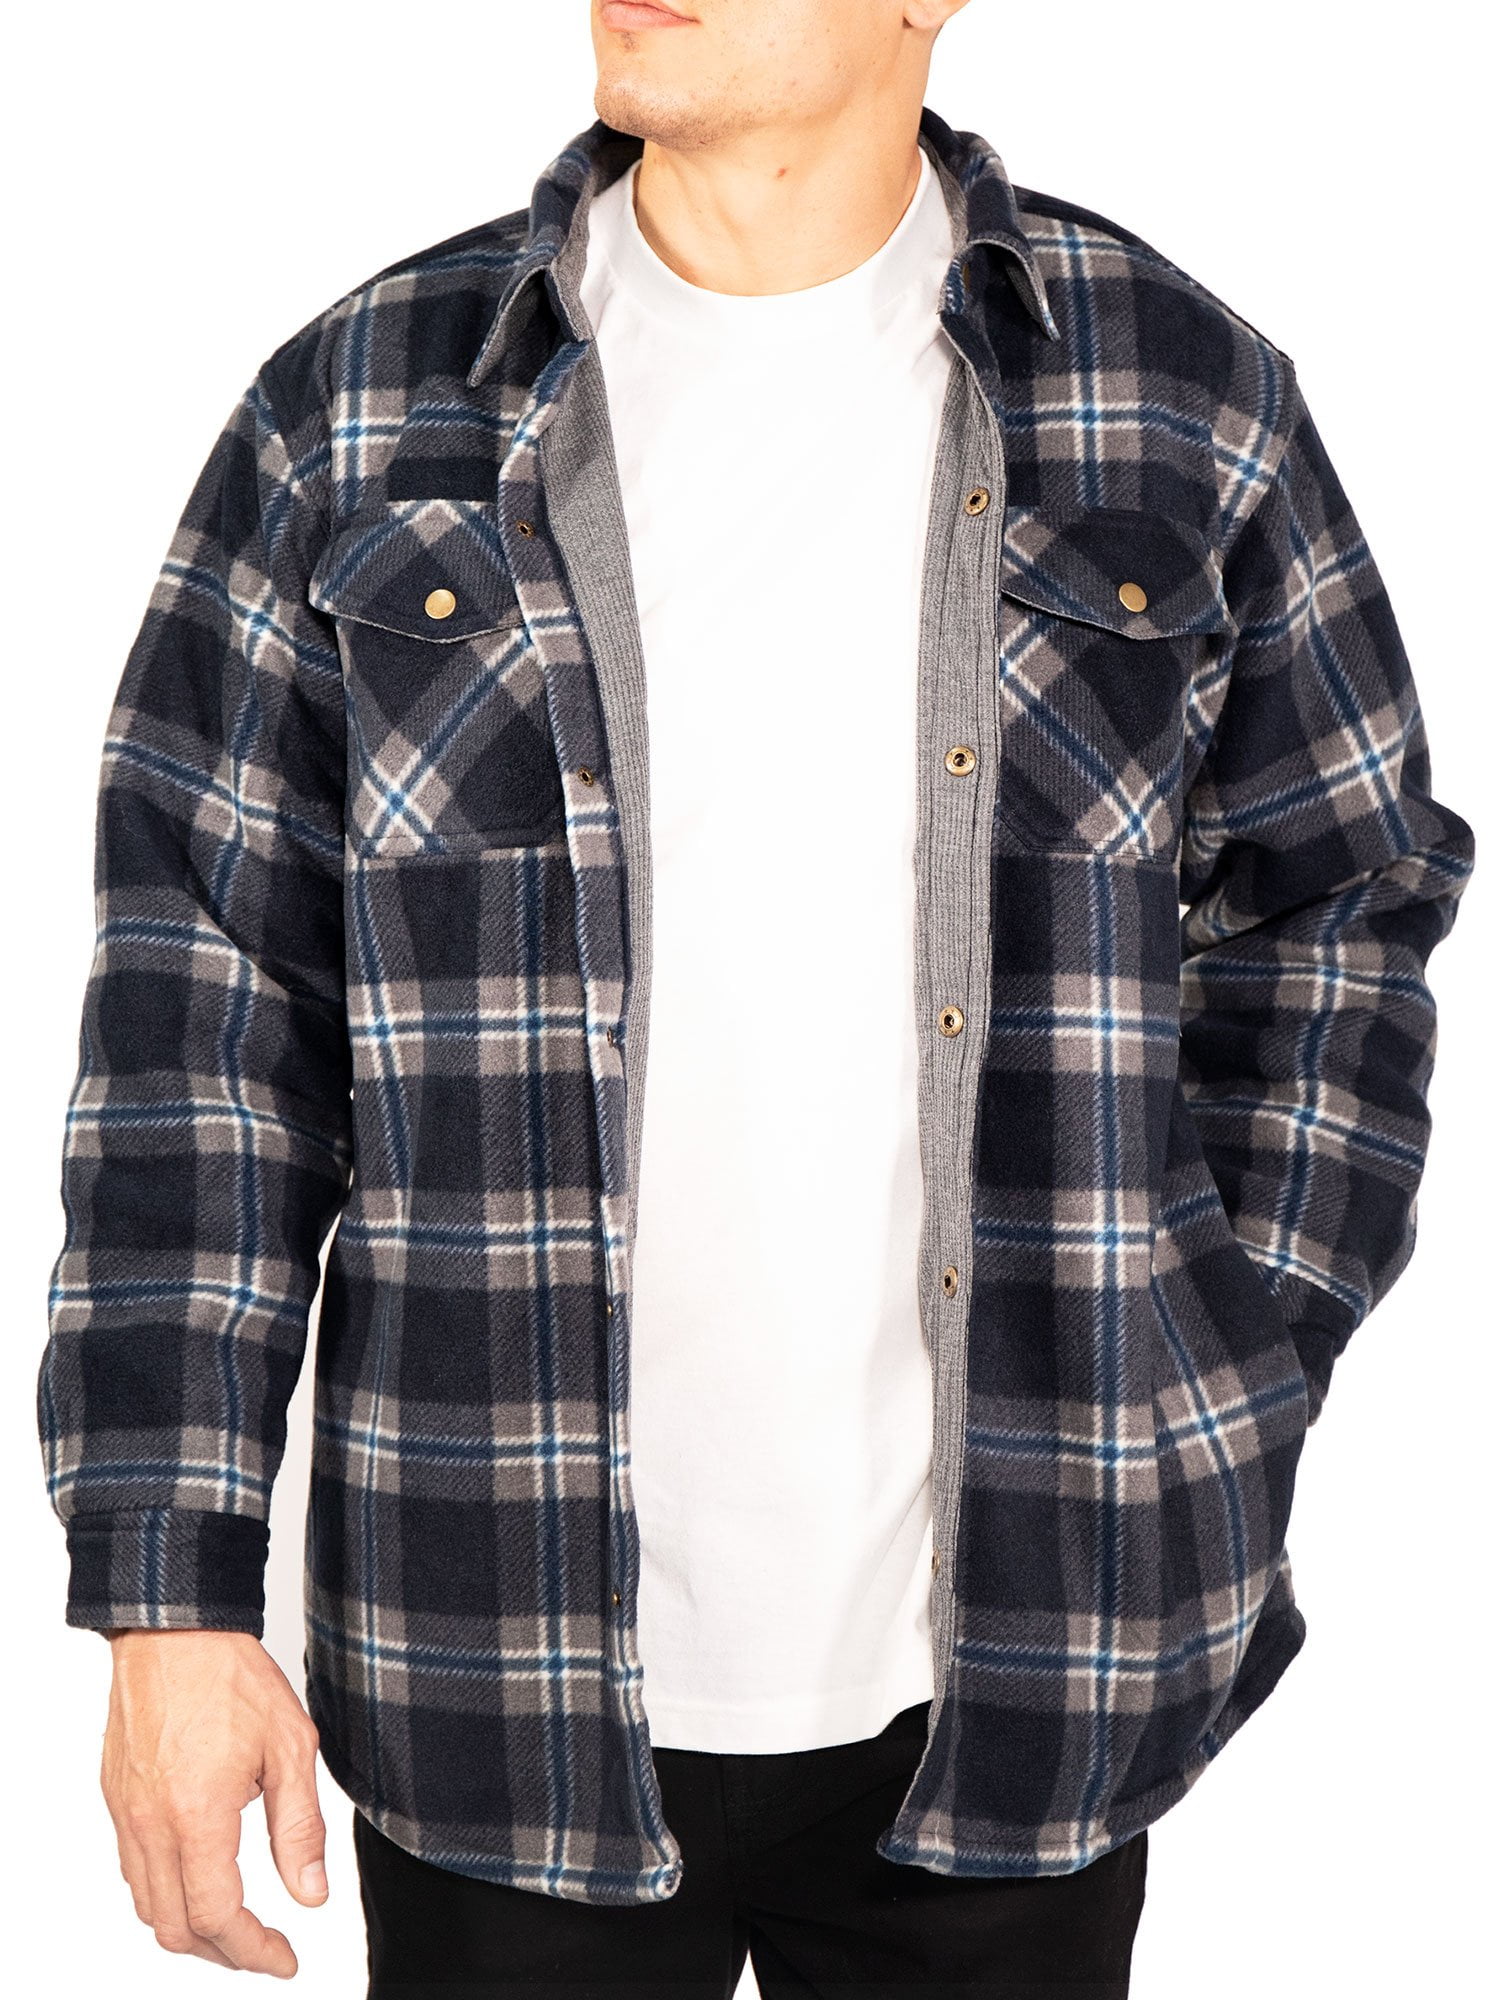 Visive Mens Flannel Shirt Long Sleeve Button Down Up Heavy Flannel Shirts Up to Size 5XL